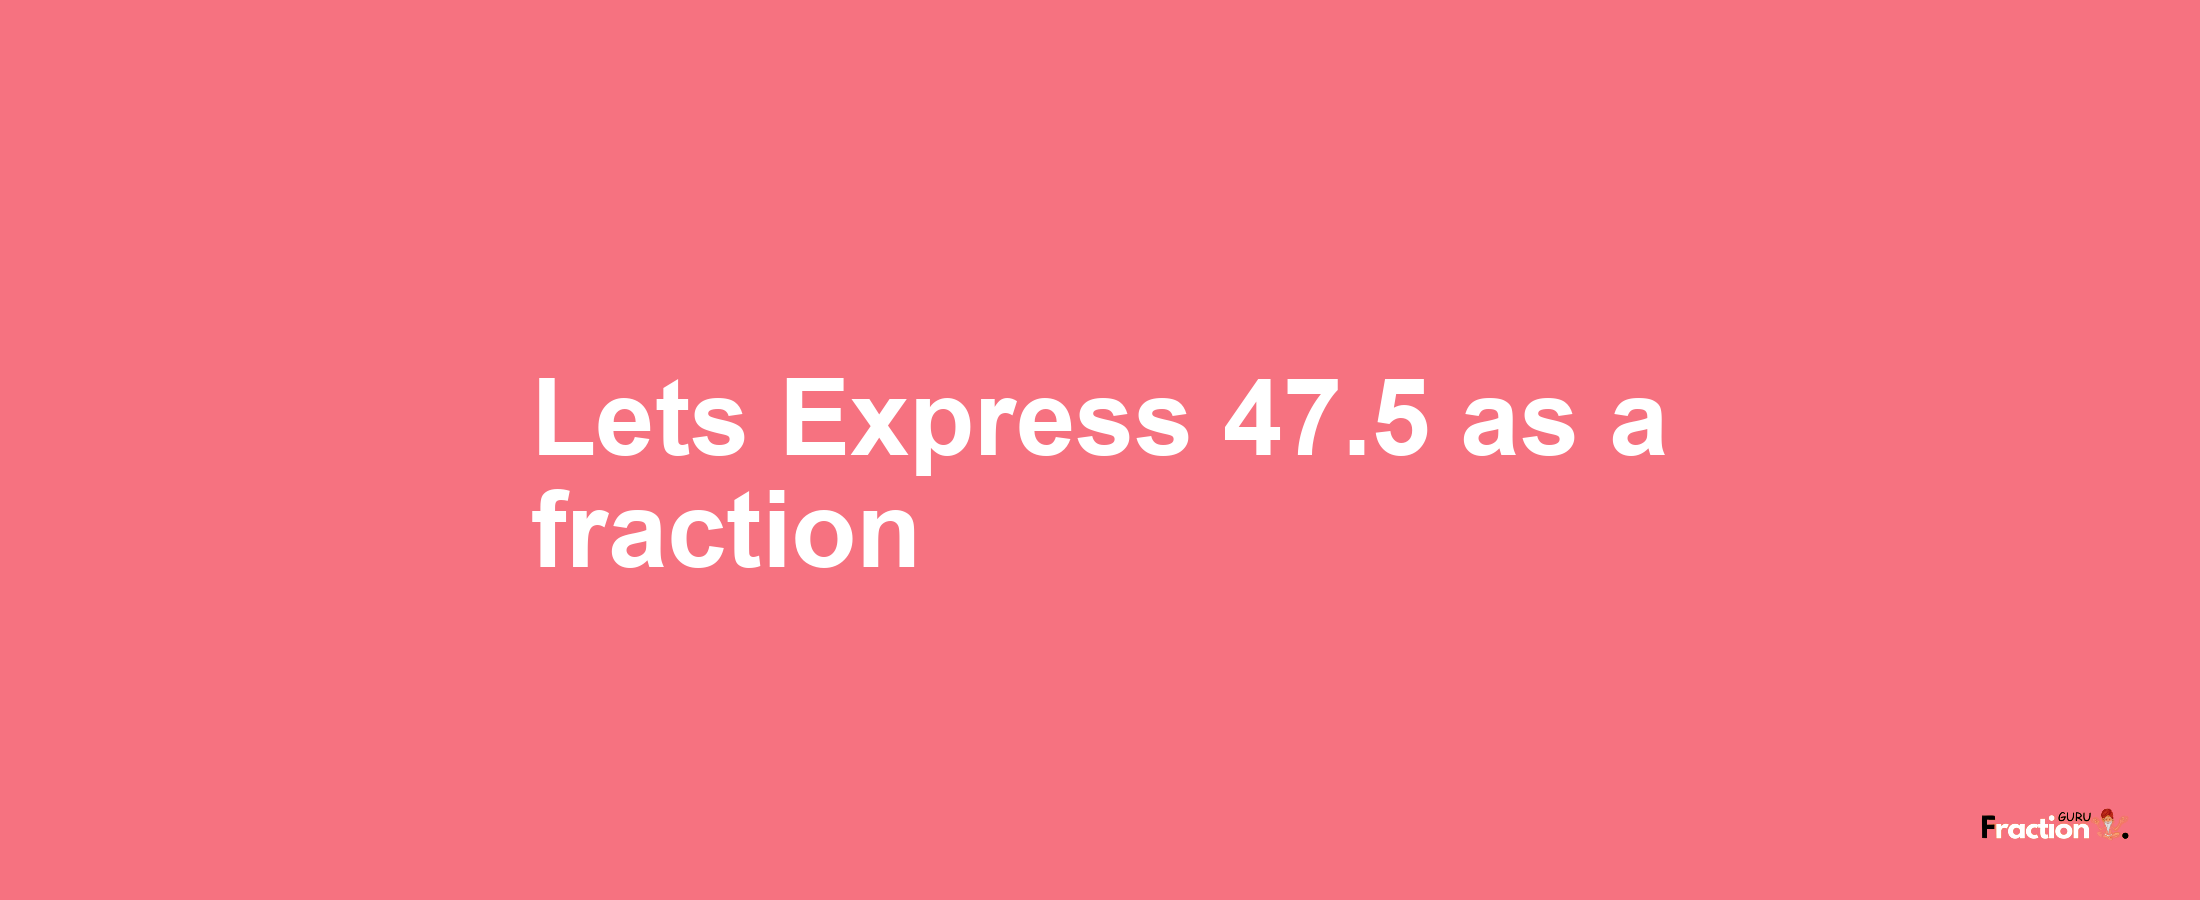 Lets Express 47.5 as afraction